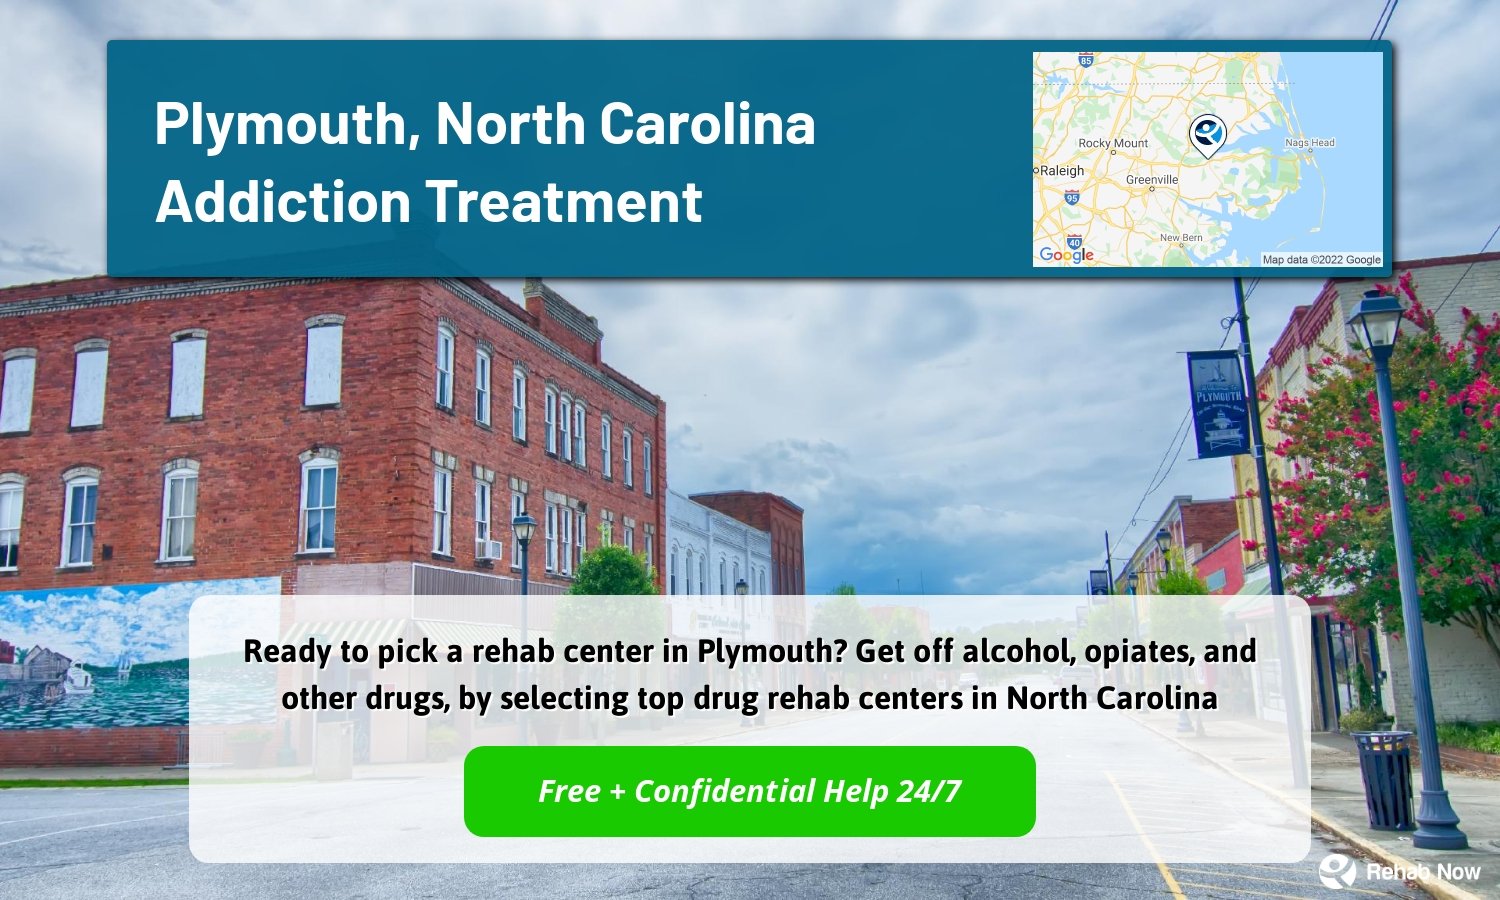 Ready to pick a rehab center in Plymouth? Get off alcohol, opiates, and other drugs, by selecting top drug rehab centers in North Carolina